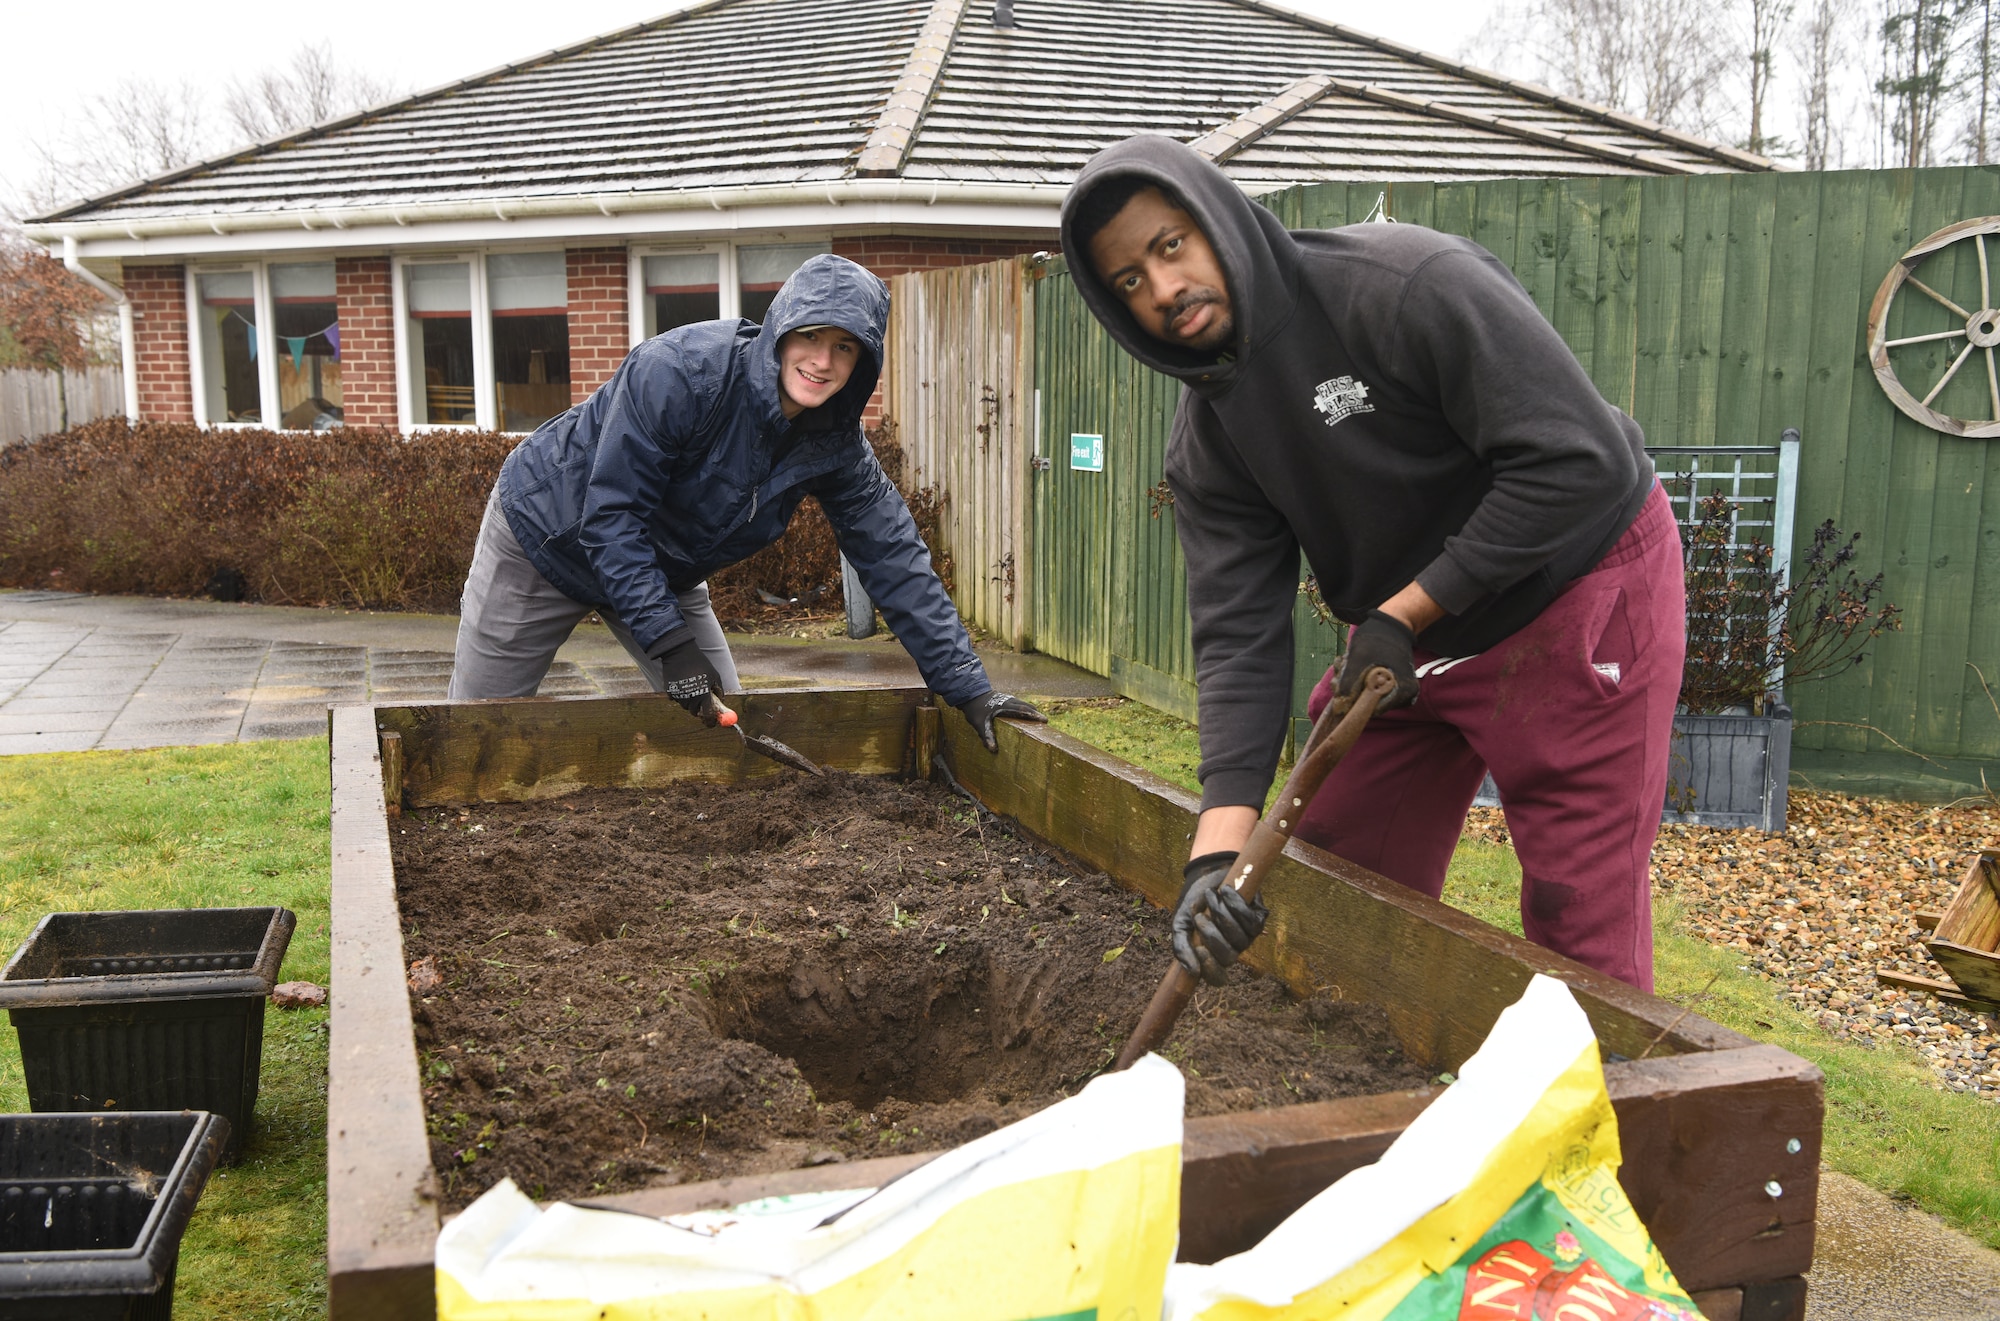 U.S. Air Force Airman 1st Class Cole Frazier, left, 100th Security Forces Squadron, and U.S. Air Force Master Sgt. Orande Spencer, 352nd Special Operations Wing, dig up weeds from a flower bed ready to replant with rosemary and thyme bushes at Mildenhall Lodge Care Home, Mildenhall, England, March 9, 2023. Team Mildenhall Airmen volunteered at the care home, and spent the day tidying the garden, planting spring flowers and making apple and blackberry pies with the residents. (U.S. Air Force photo by Karen Abeyasekere)